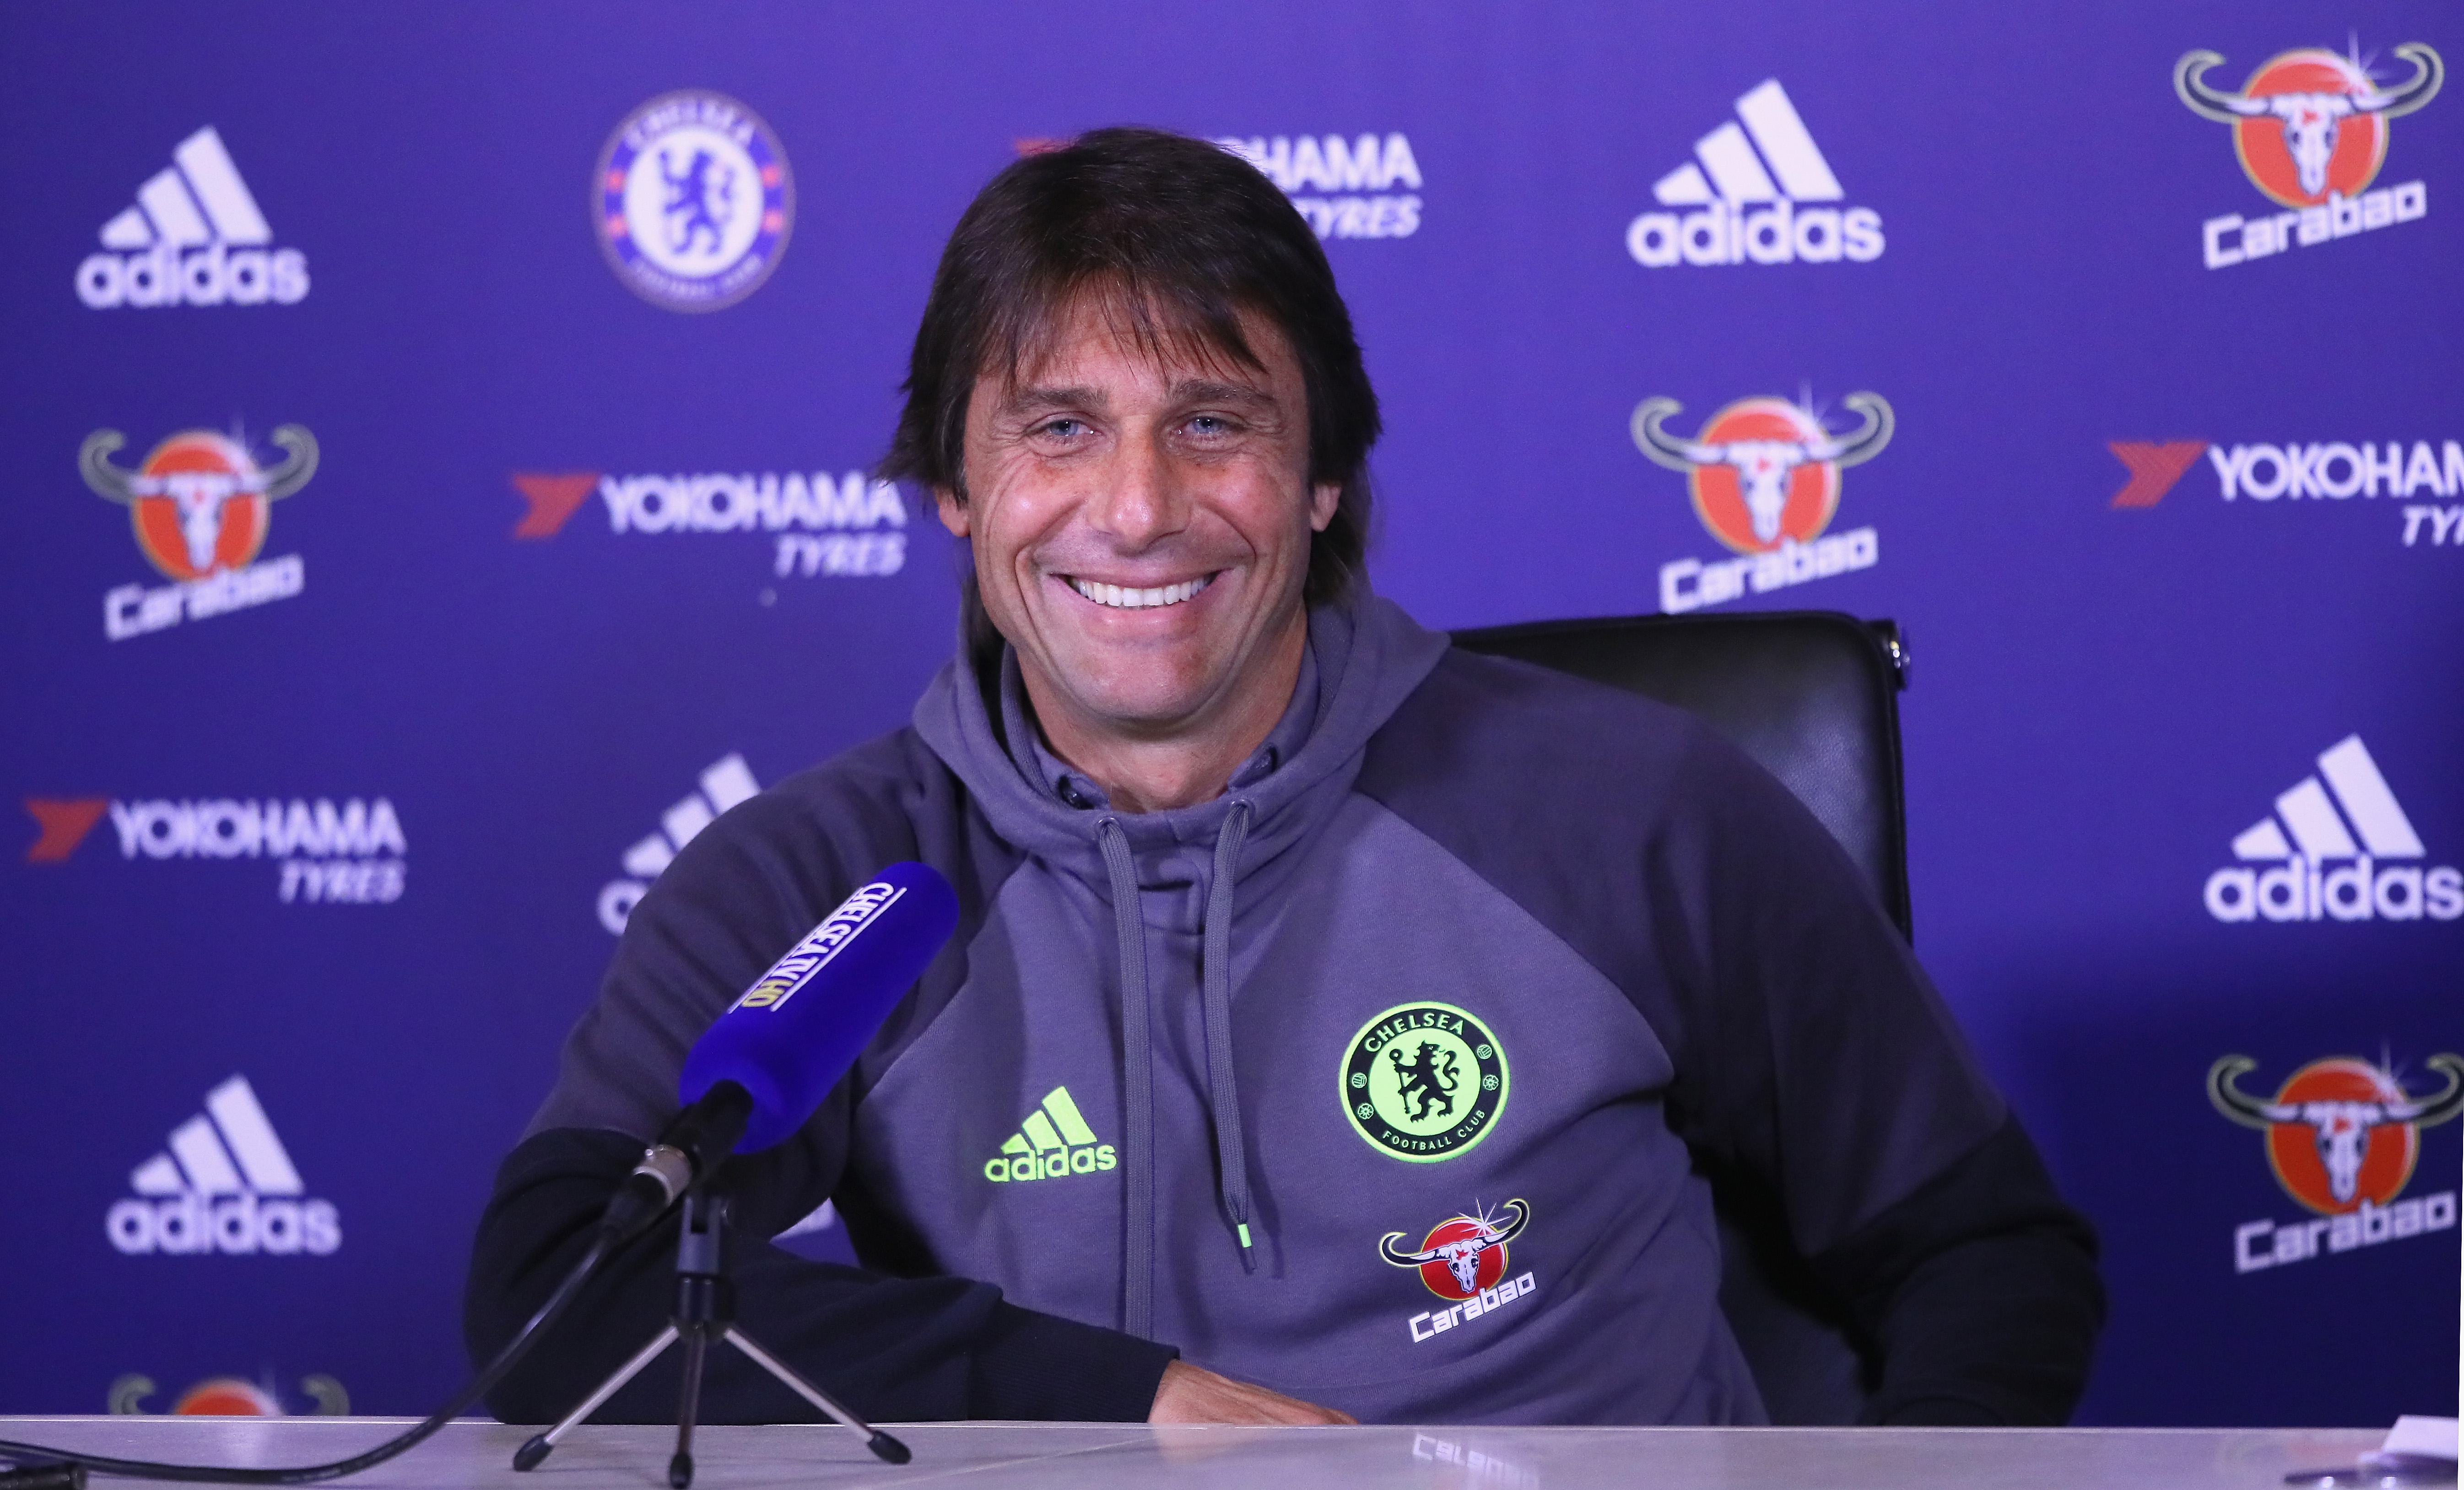 COBHAM, ENGLAND - OCTOBER 21:  Antonio Conte, Chelsea mananger, is pictured during a press conference at Chelsea Training Ground on October 21, 2016 in Cobham, England.  (Photo by Andrew Redington/Getty Images)